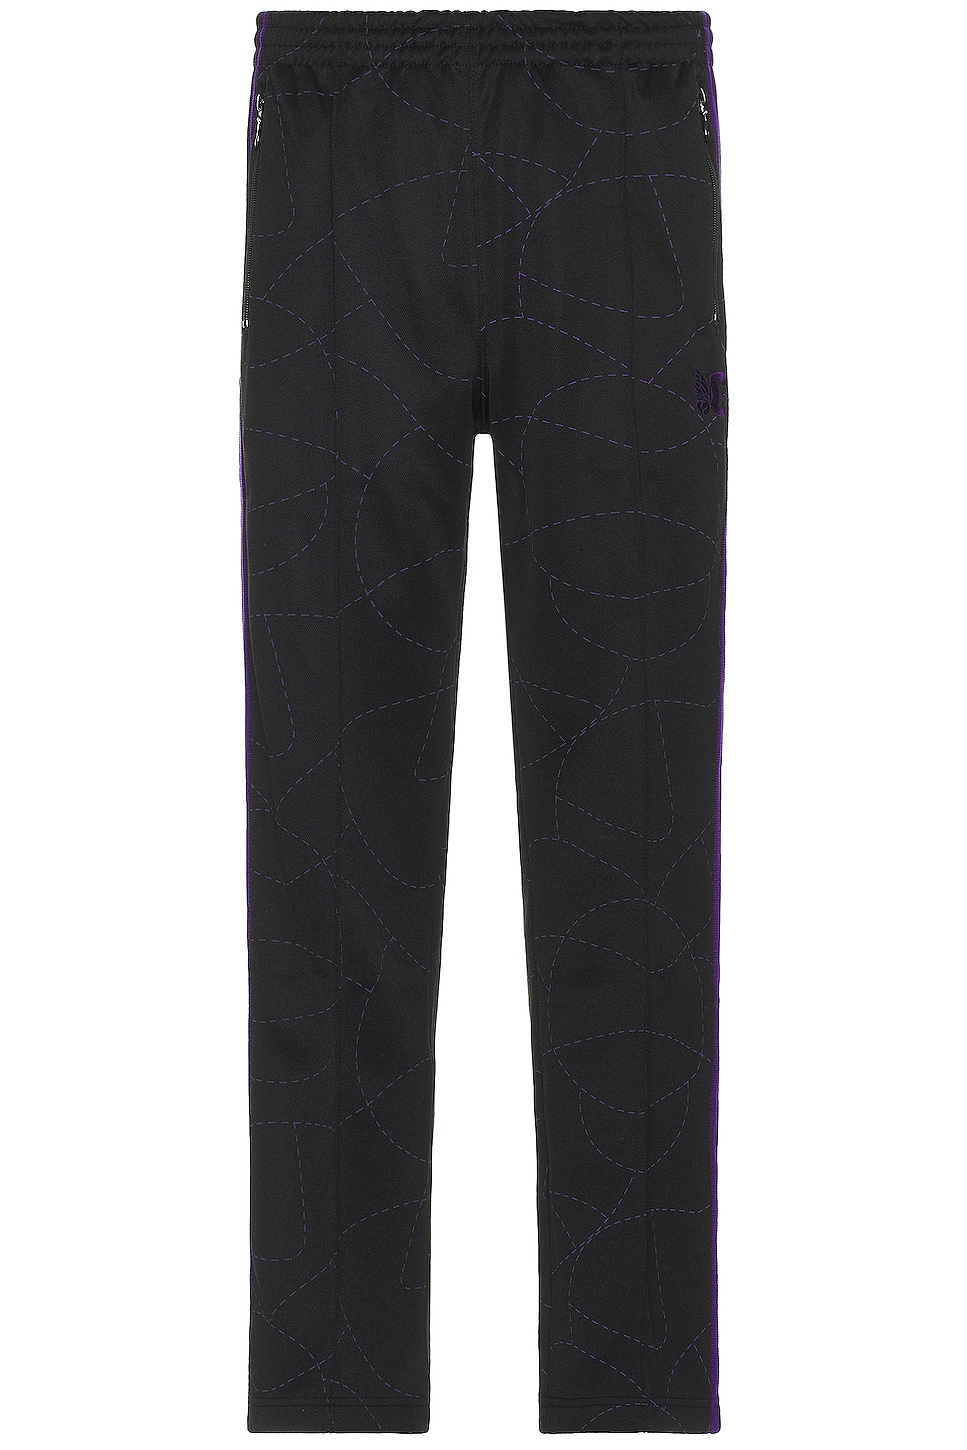 Image 1 of Needles X DC Track Pants in Black